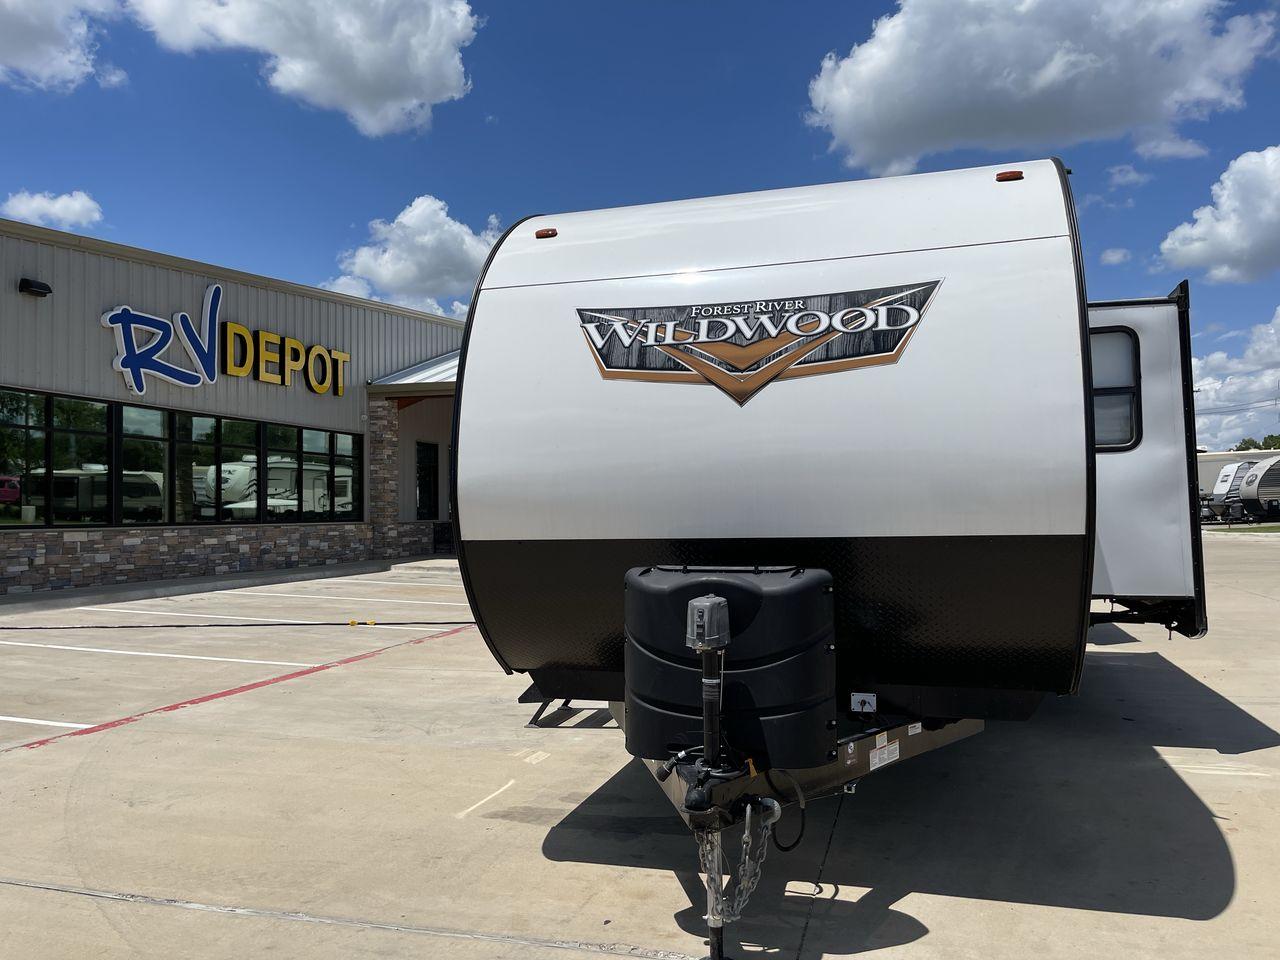 2022 FOREST RIVER WILDWOOD 31KQBTS (4X4TWDG2XN8) , Length: 36.58 ft | Dry Weight: 8,573 lbs. | Slides: 3 transmission, located at 4319 N Main St, Cleburne, TX, 76033, (817) 678-5133, 32.385960, -97.391212 - Looking for a spacious and comfortable travel trailer for your next adventure? Look no further than this 2022 Forest River Wildwood 31KQBTS, available for sale at RV Depot in Cleburne, TX. With its impressive features and unbeatable price of $42,995, this travel trailer is the perfect choice for fam - Photo #0